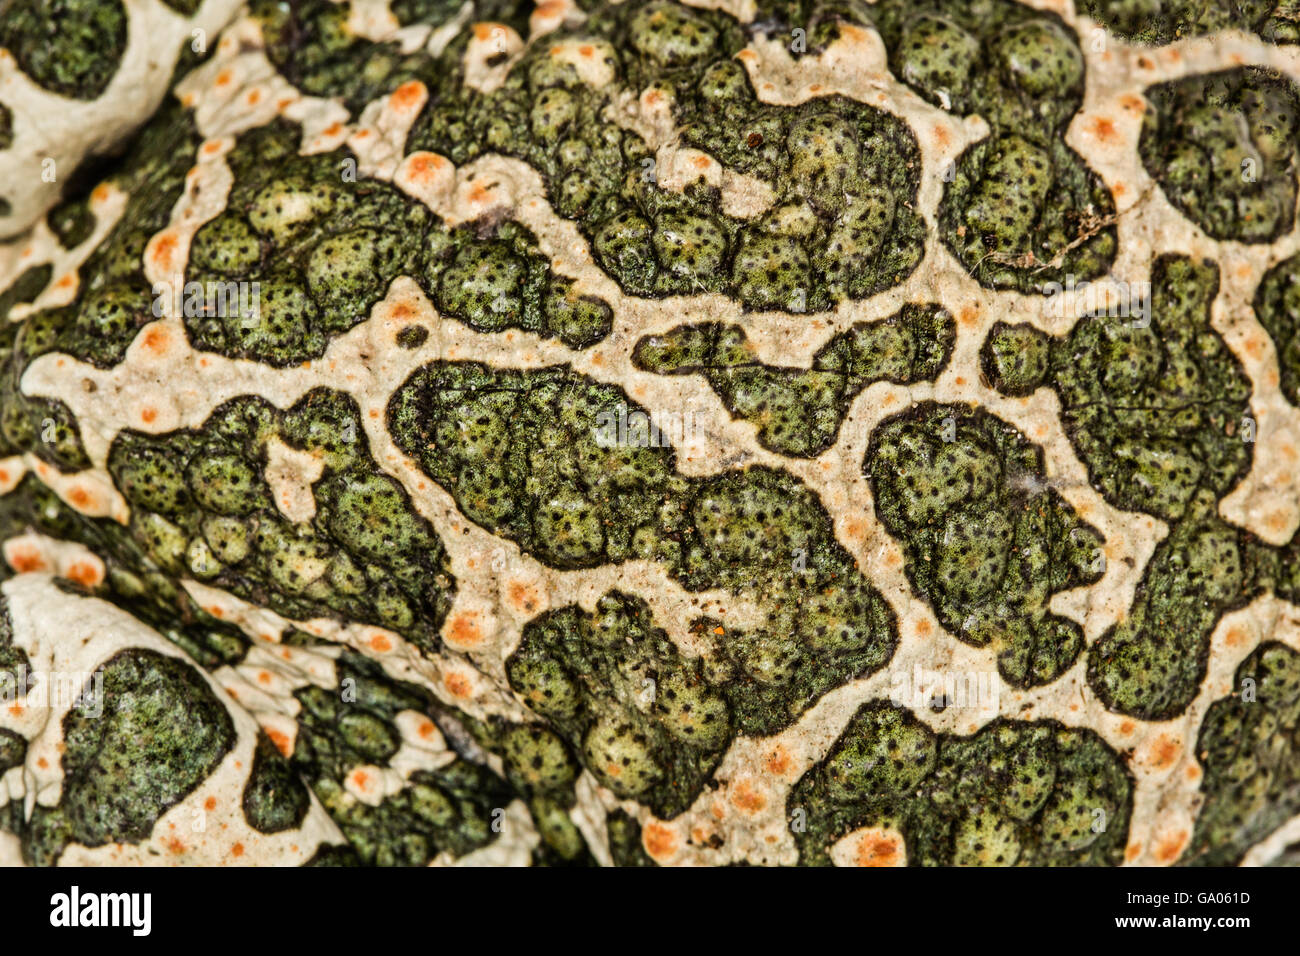 Skin of green toad, spotted natural background Stock Photo